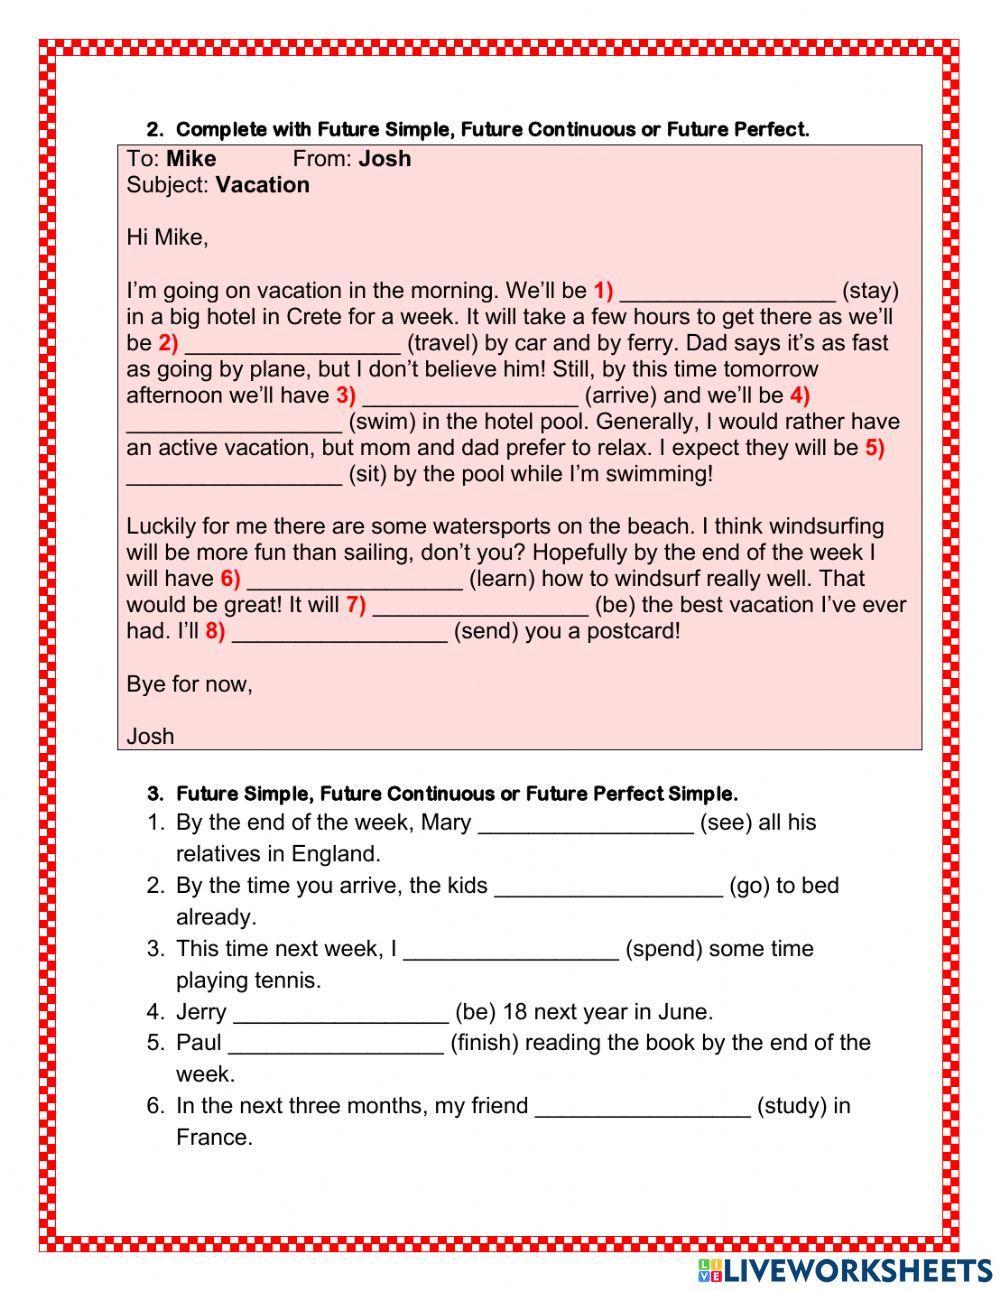 Future simple, future continuous and future perfect - worksheet 2